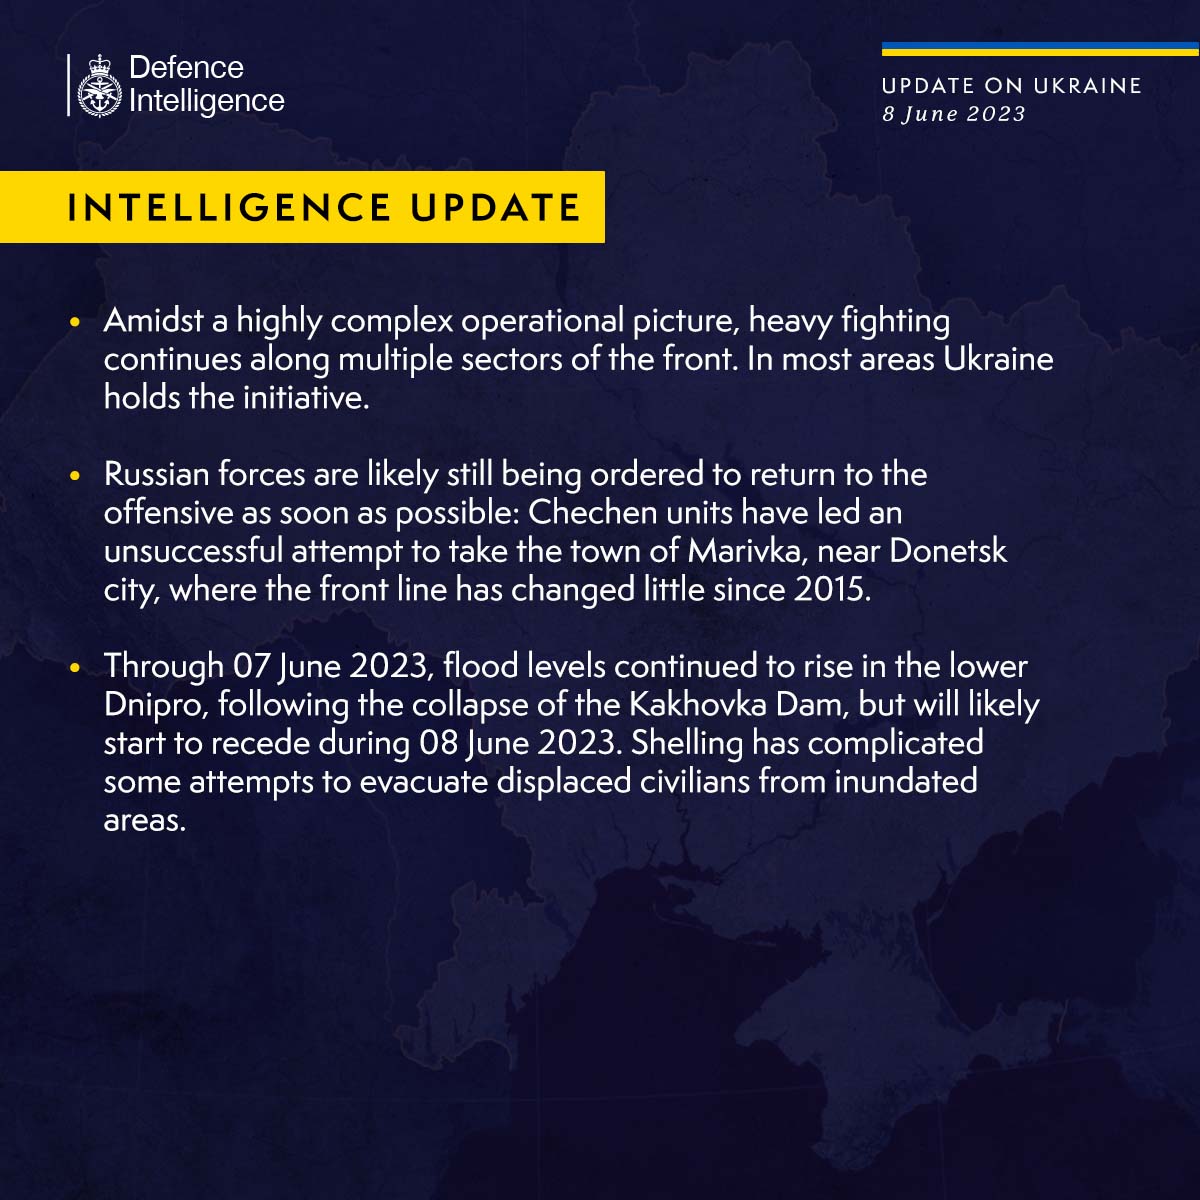 The UK Defense Intelligence Says Ukraine Holds Initiative in Most Areas of the Front, Defense Express